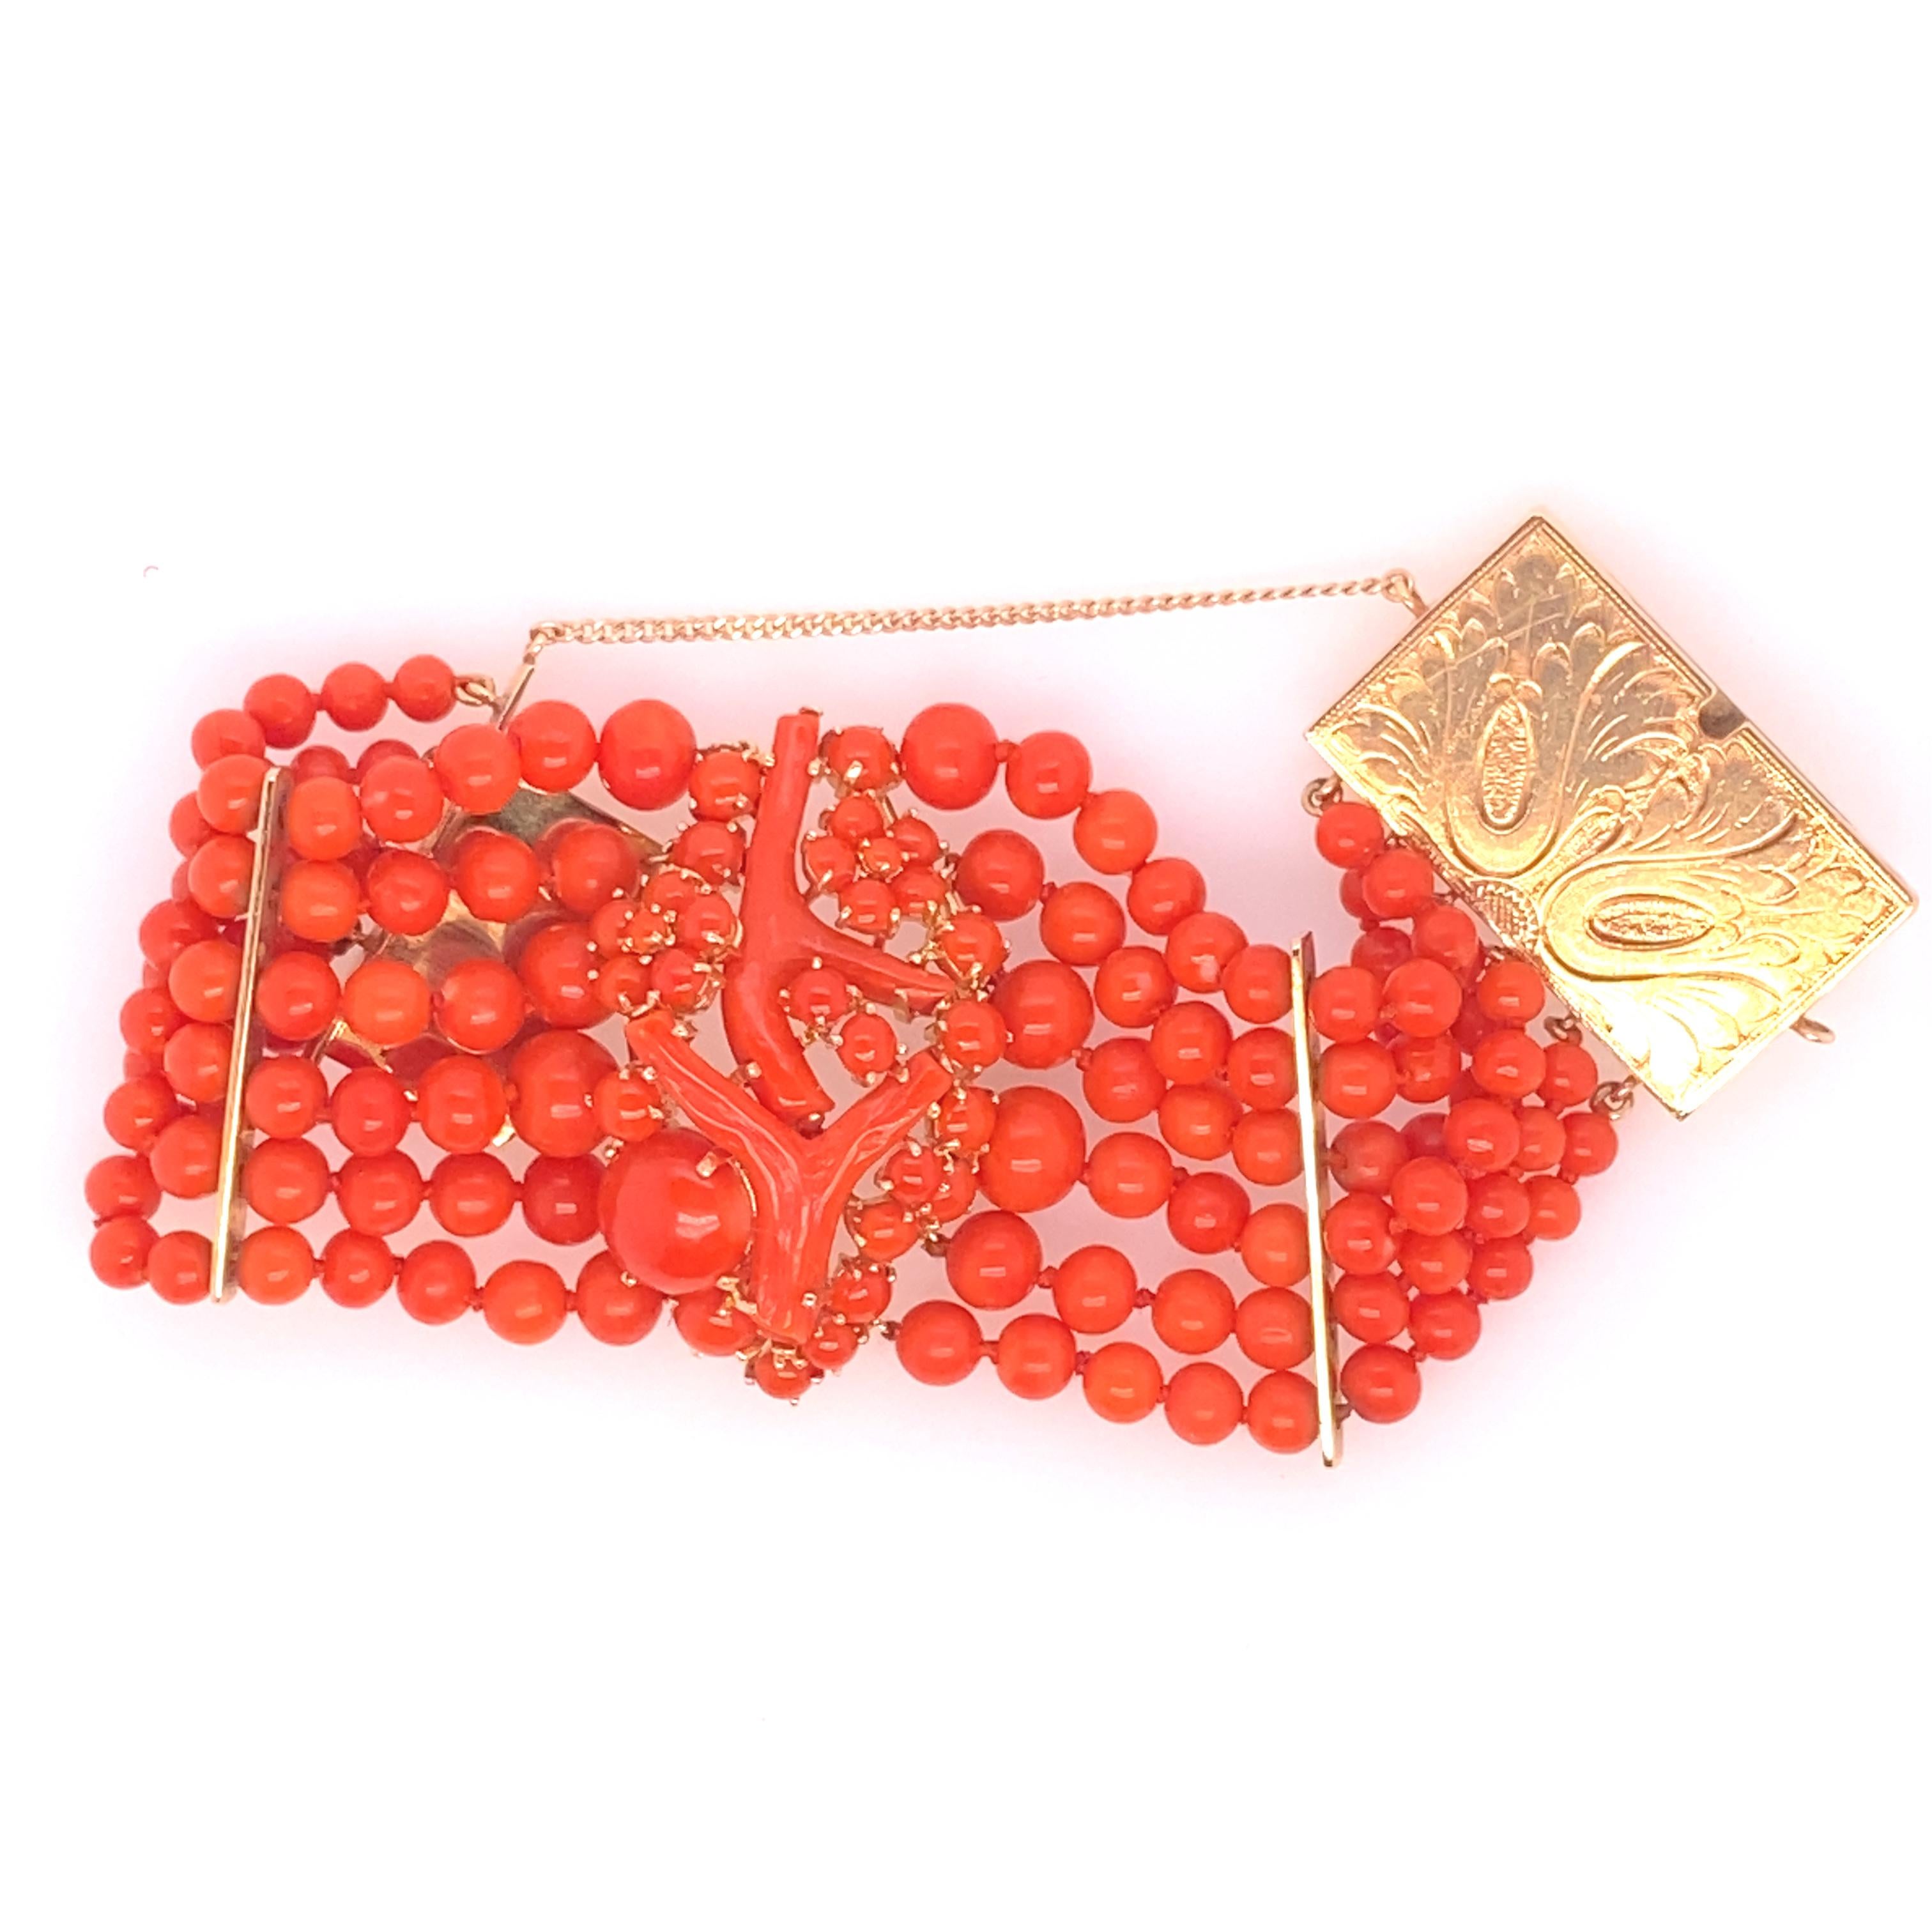 14kt yellow gold vintage Italian Red Coral bracelet.   This gorgeous piece belong to the Estate of Alfred W. Miles of New York.  He was a well known CPA  working as the director of the Hoving Corporation, Vice President and on the board of Tiffany